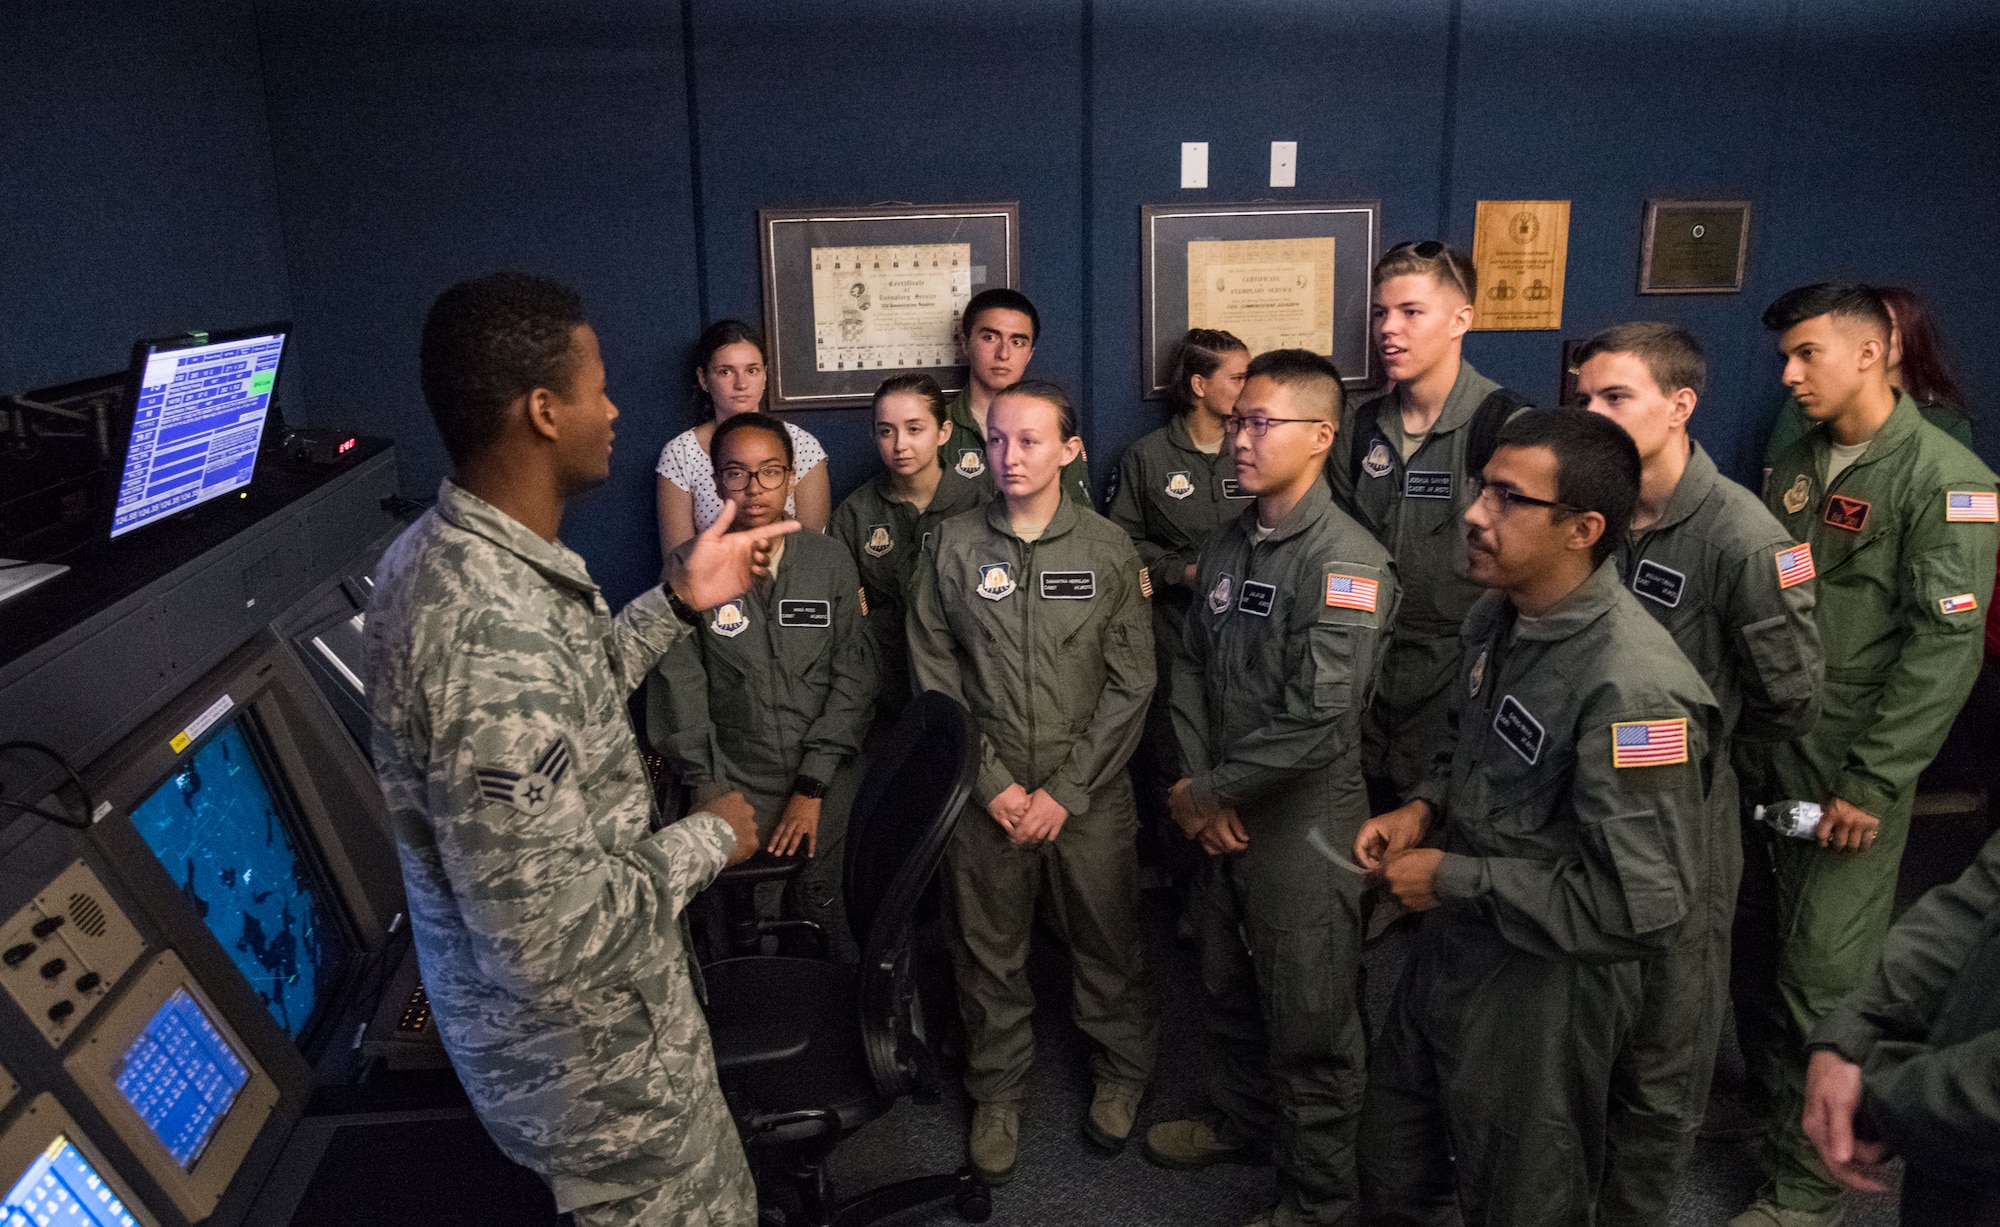 Senior Airman Kristapher Guillen, 436th Operations Support Squadron Radar Approach Control air traffic controller answers questions from Air Force Junior Reserve Officers’ Training Corps cadets during a tour of the RAPCON facility and control tower July 23, 2019, at Dover Air Force Base, Del. Cadets who attended the AFJROTC Summer Flight Academy at Delaware State University in Dover spent half of the day touring aviation-related facilities and aircraft. (U.S. Air Force photo by Roland Balik)